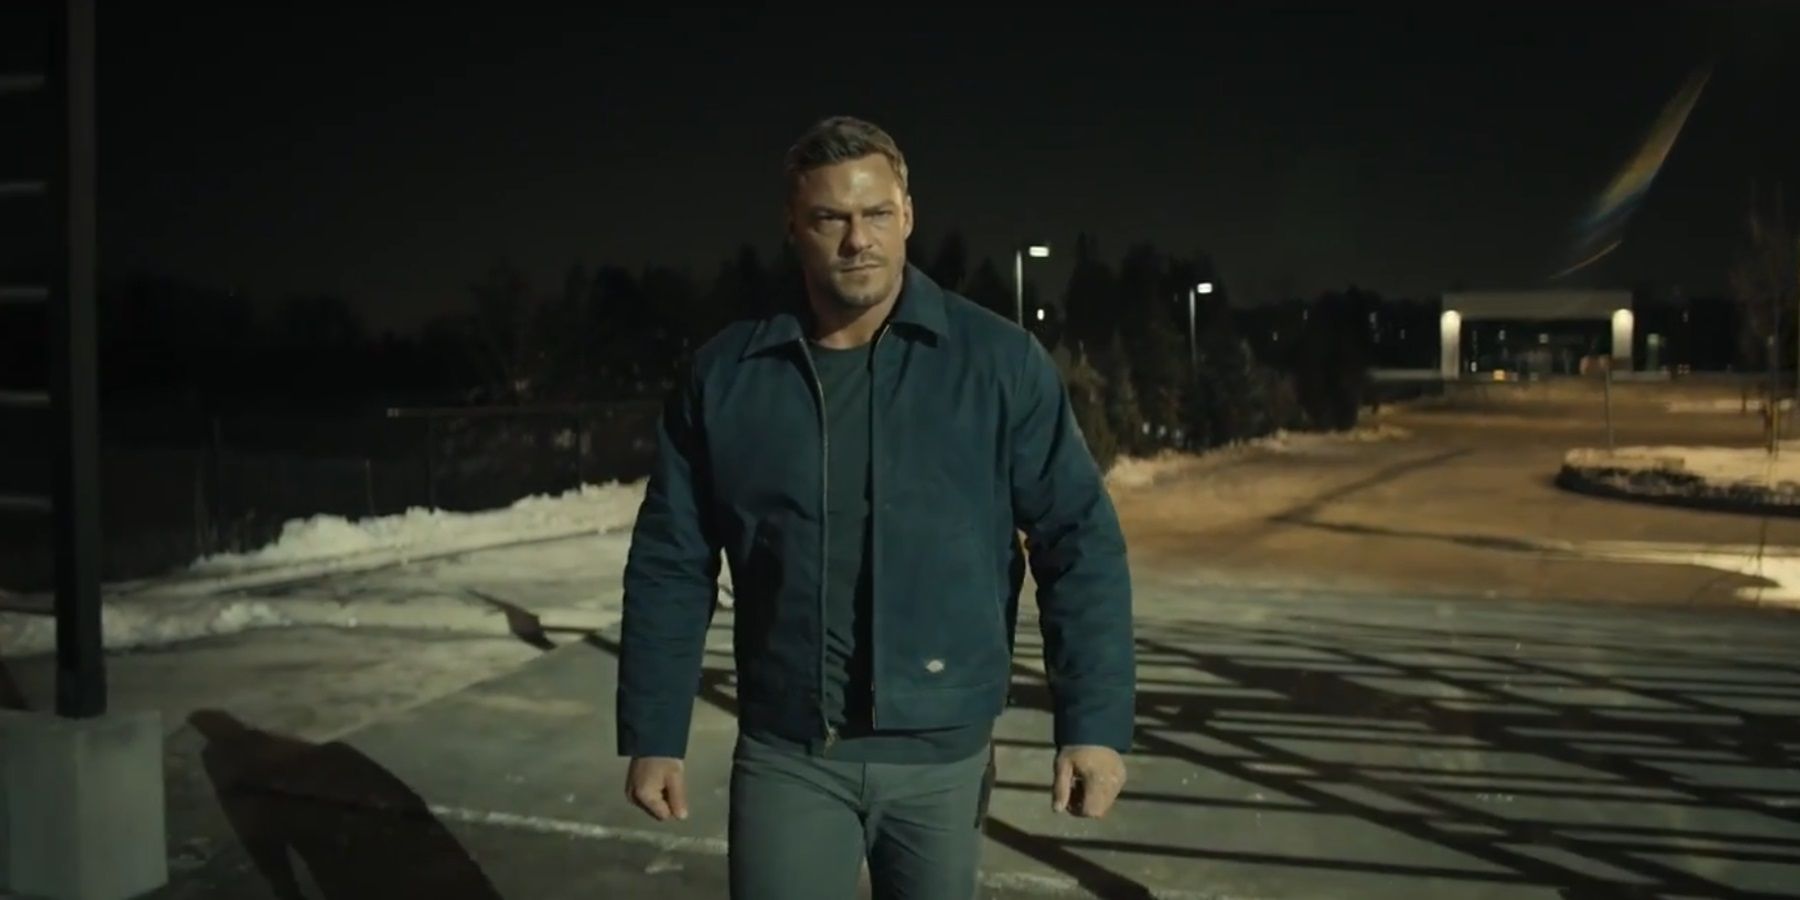 Jack Reacher walking through a large metal gate with an empty parking lot behind him from Season 2